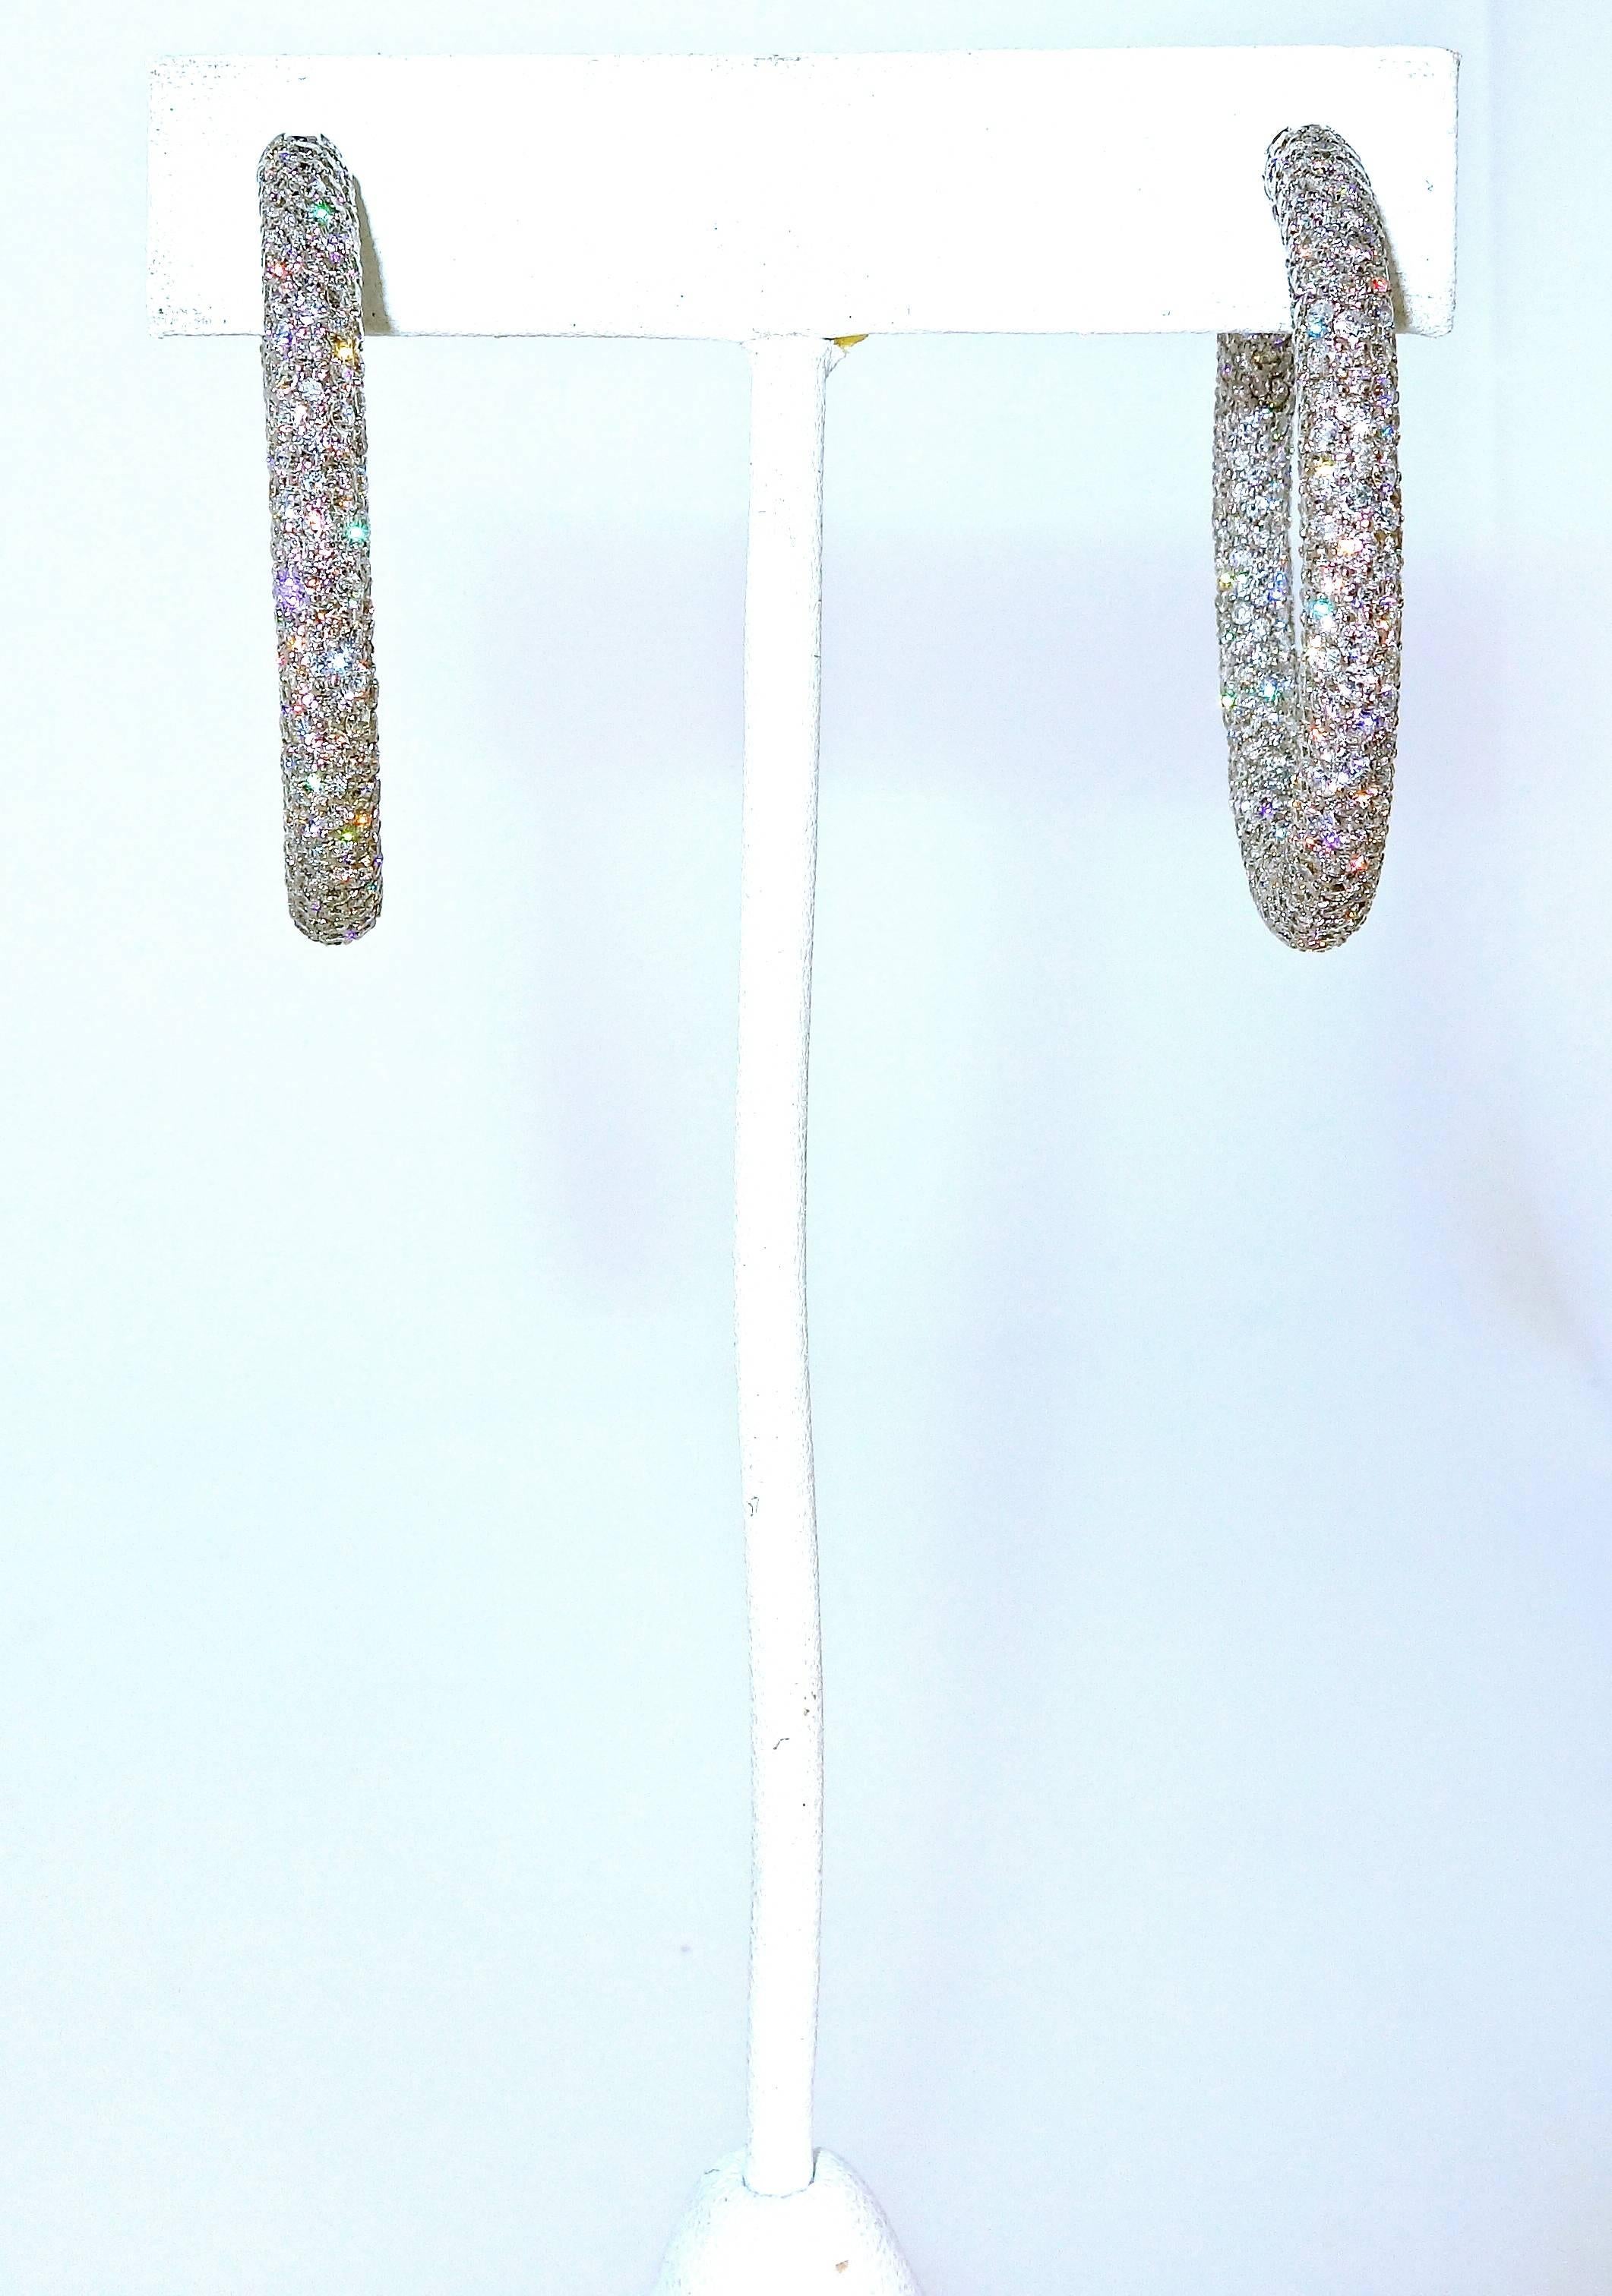 Fine white diamonds - all modern brilliant cut, well matched, well cut, with fine symmetry.  The over 970 diamonds are colorless to near colorless (F/G), and very very slightly included to very slightly included (VVS2/VS1).  These large hoops with